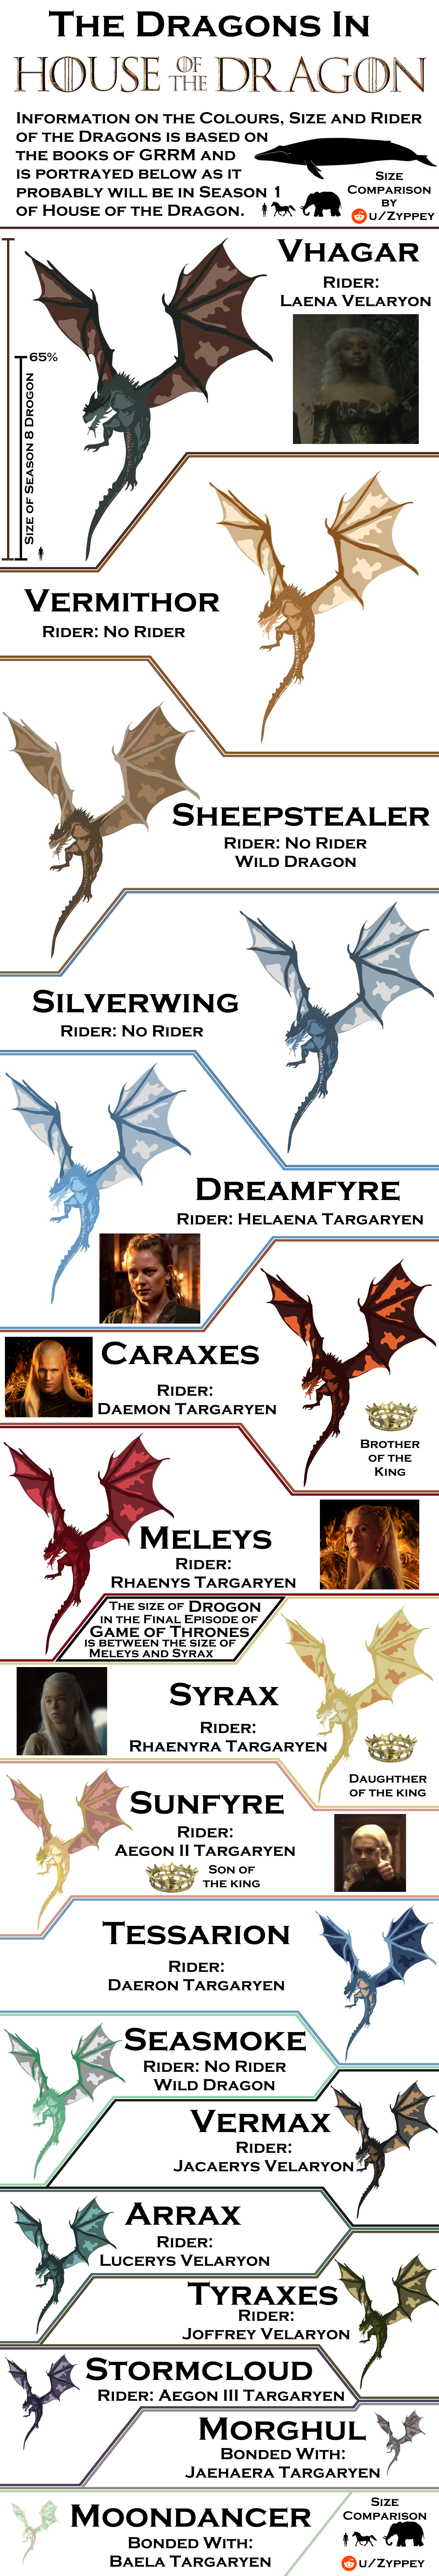 Dragons in House of Dragon